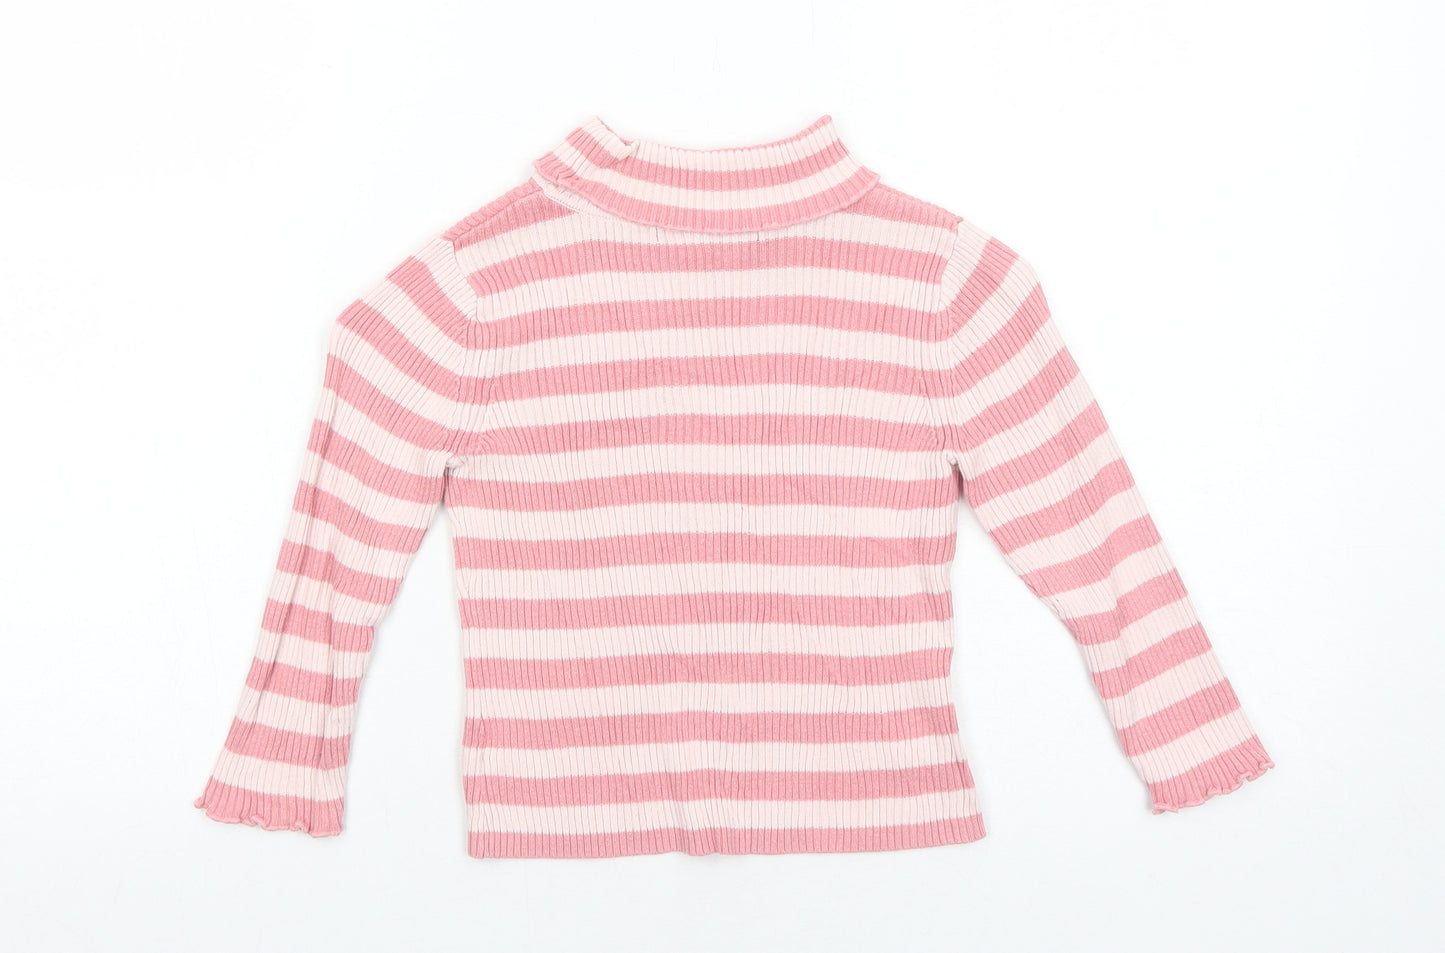 George Girls Pink Striped Cotton Basic T-Shirt Size 3-4 Years Roll Neck Pullover